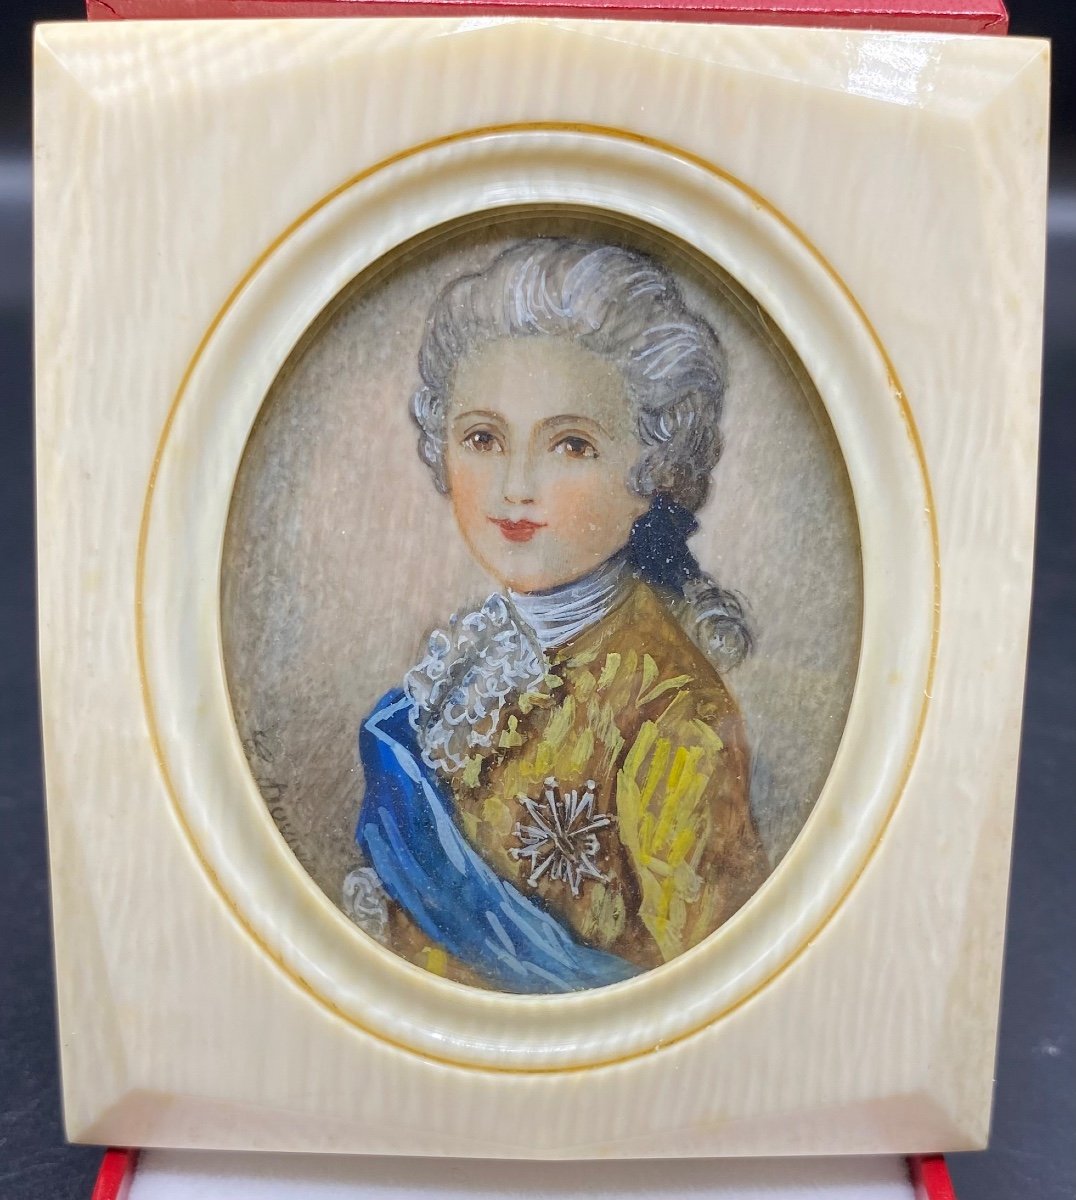 Miniature On Ivory Like The Frame From The 1930s By C. Duvivier